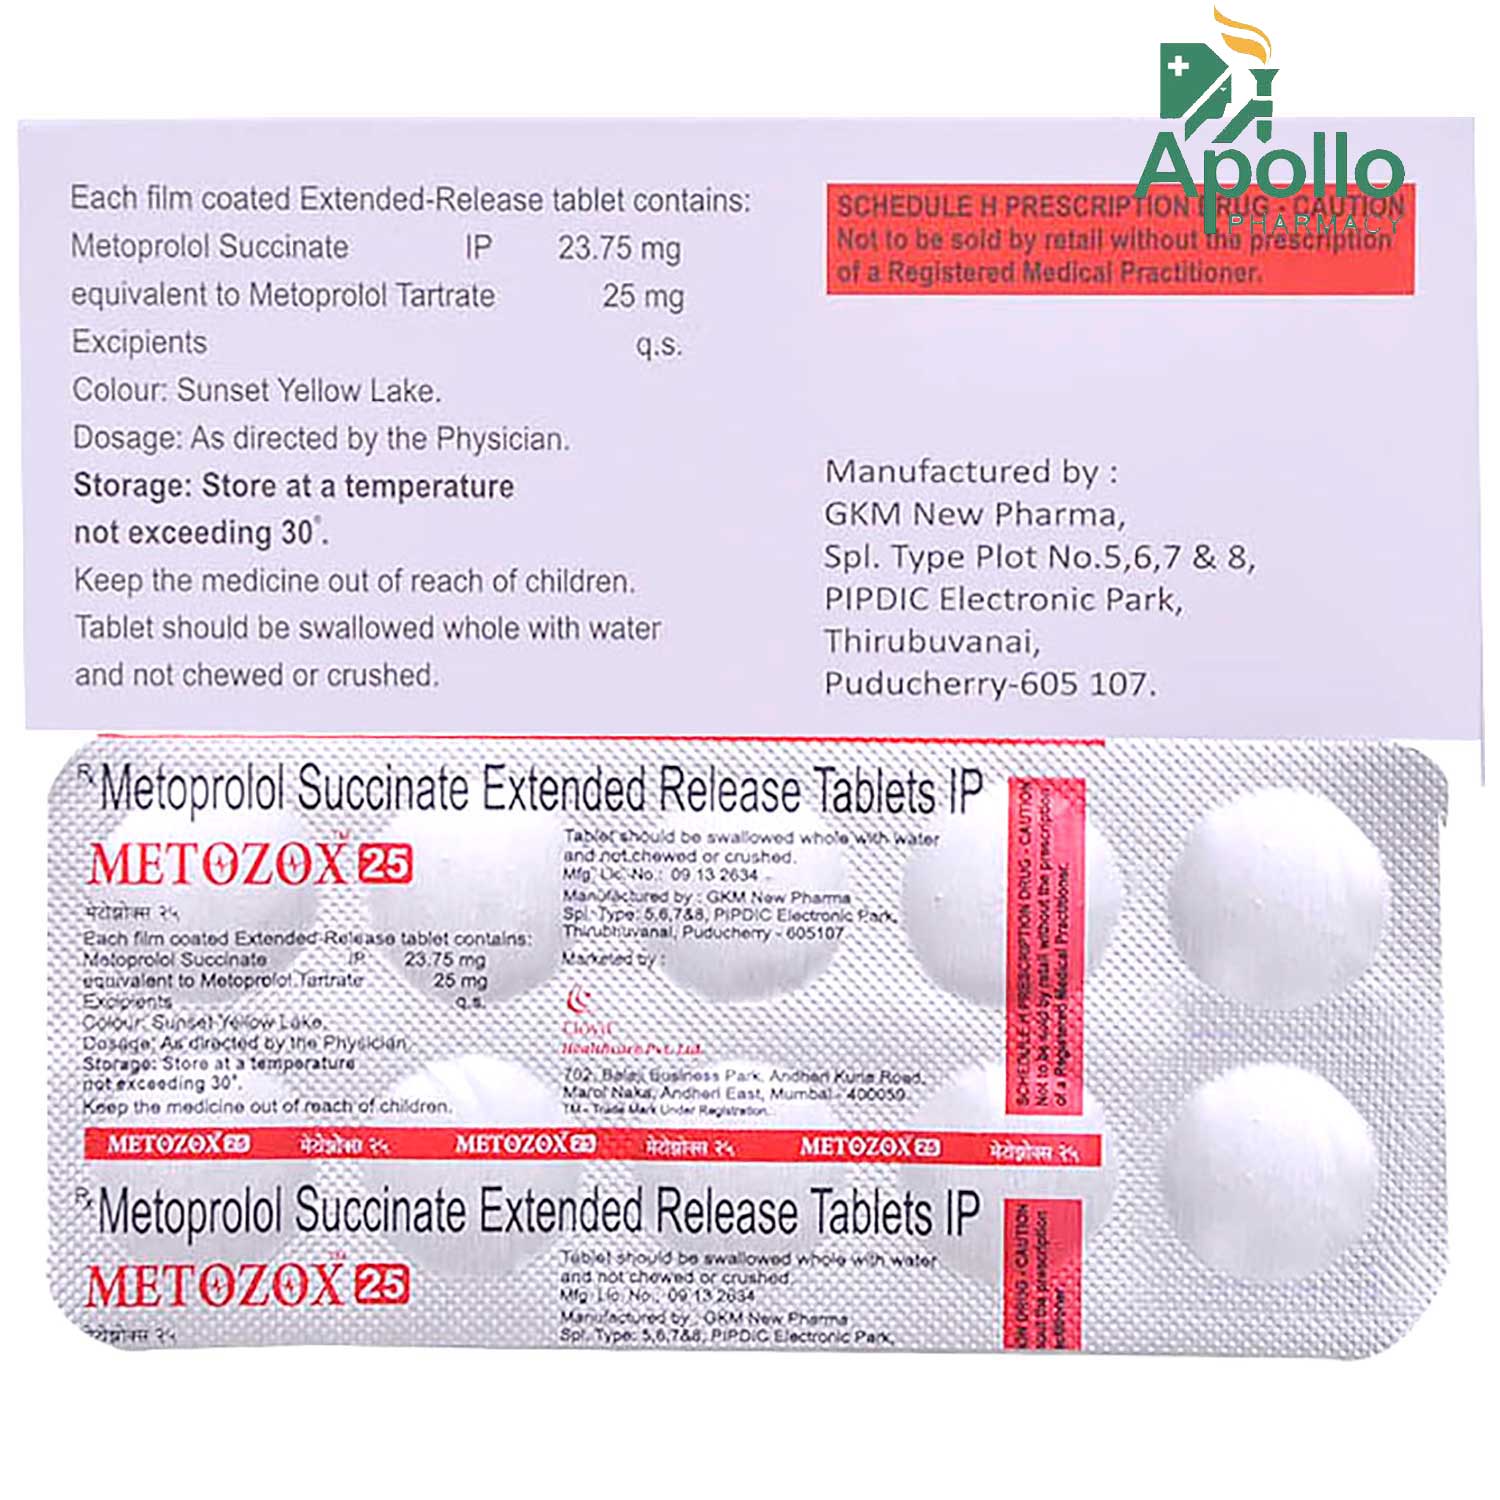 Metozox ER 25 Tablet 10's Price, Uses, Side Effects, Composition ...